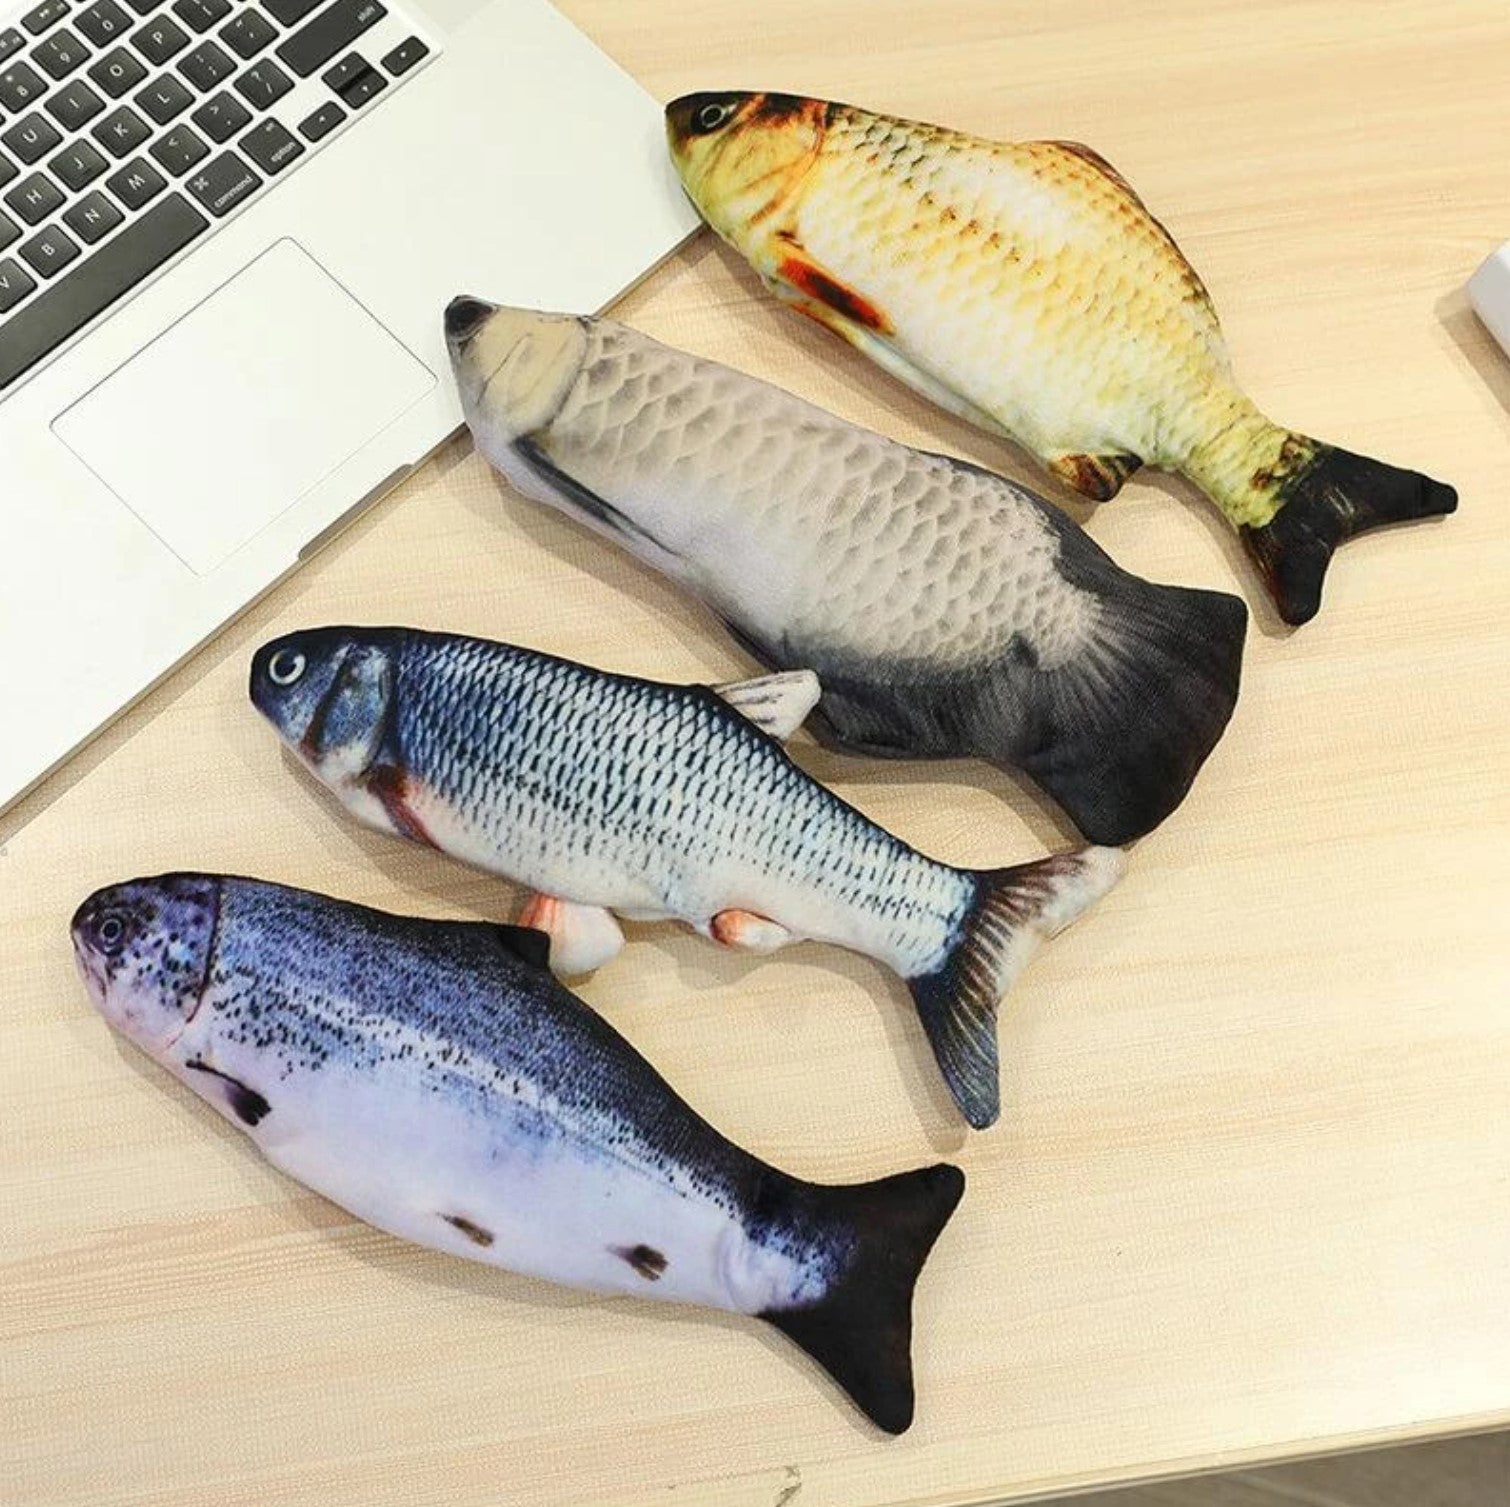 Four Different Floppy Fishy Flopping Cat Toys On Table